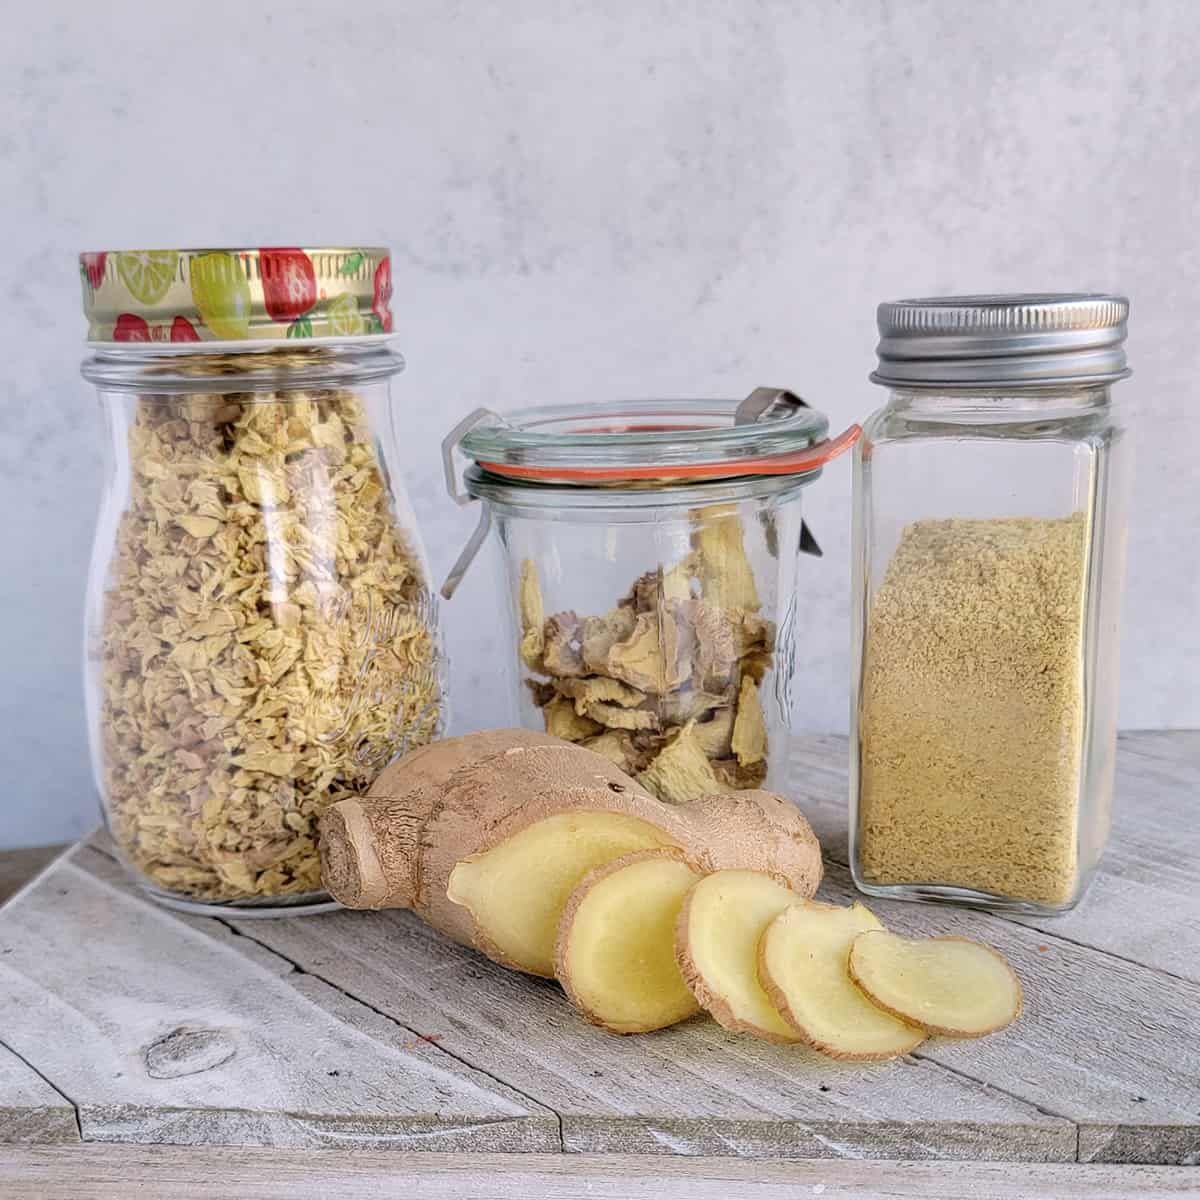 How To Dehydrate Ginger And Make Ginger Powder The Purposeful Pantry